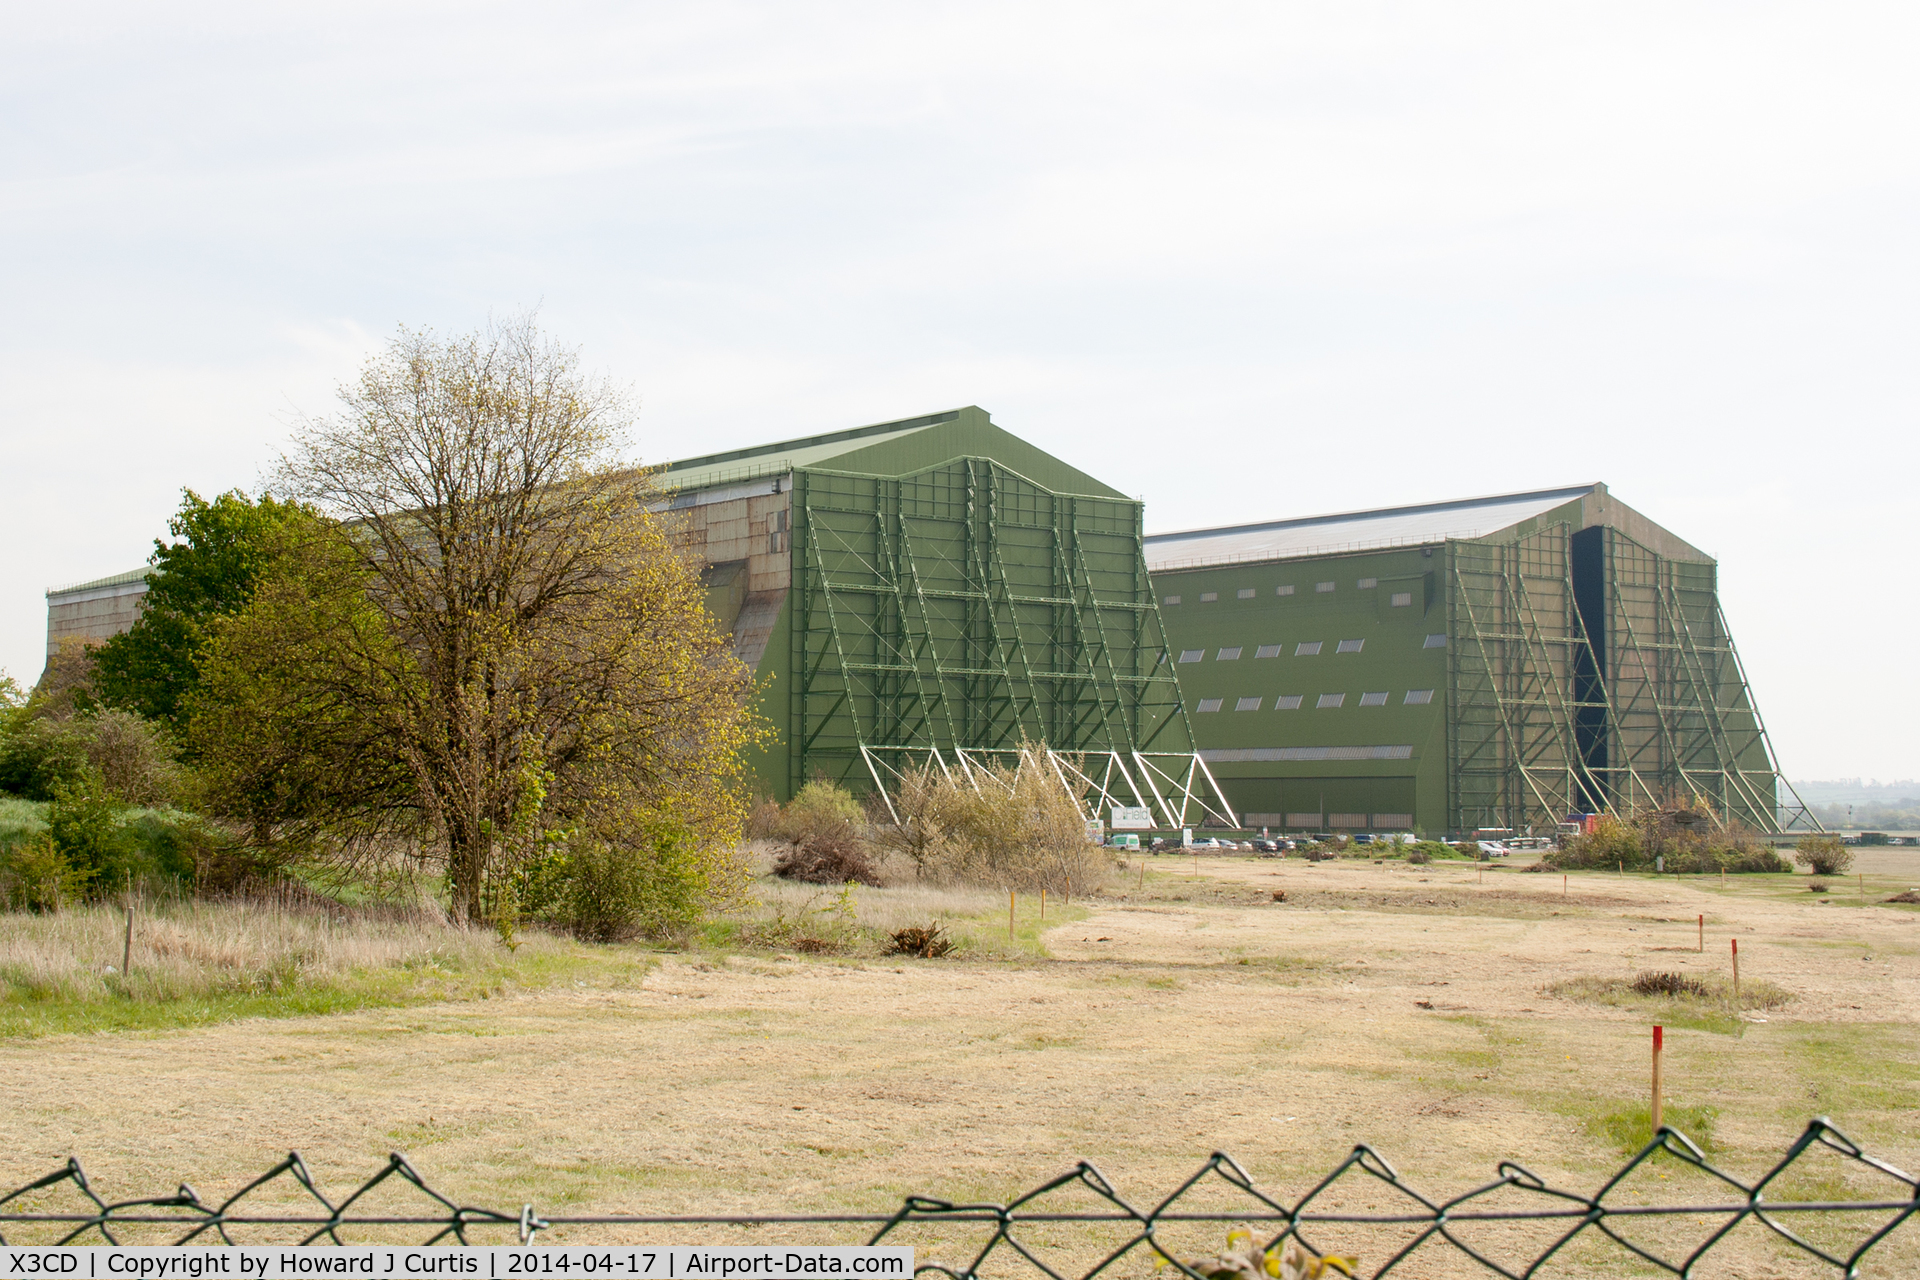 X3CD Airport - A shot of the old airship hangars, one of which was home to the Airlander prototype.